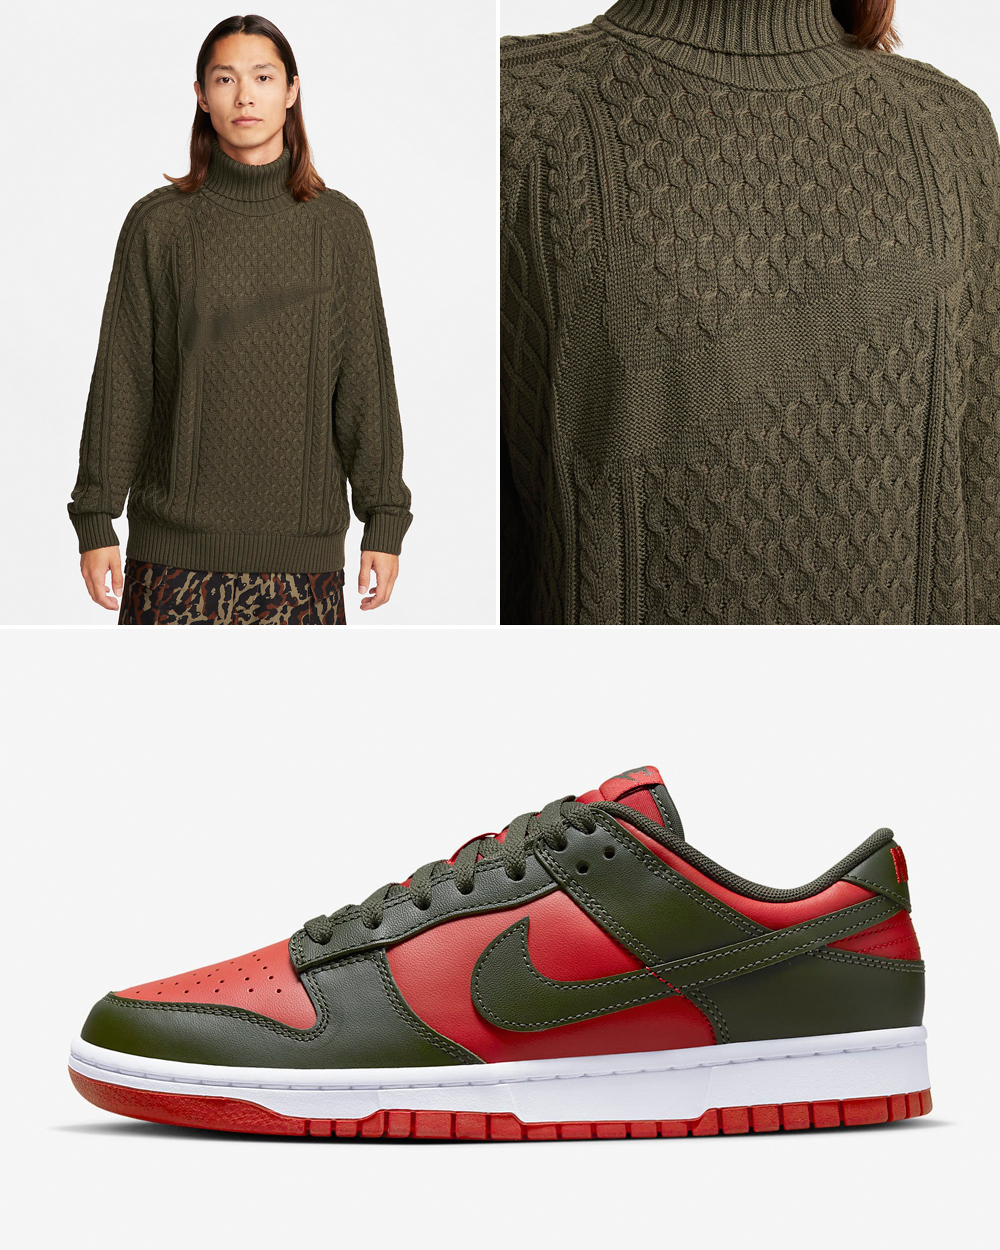 Nike-Dunk-Low-Mystic-Red-Cargo-Khaki-Sweater-Matching-Outfit